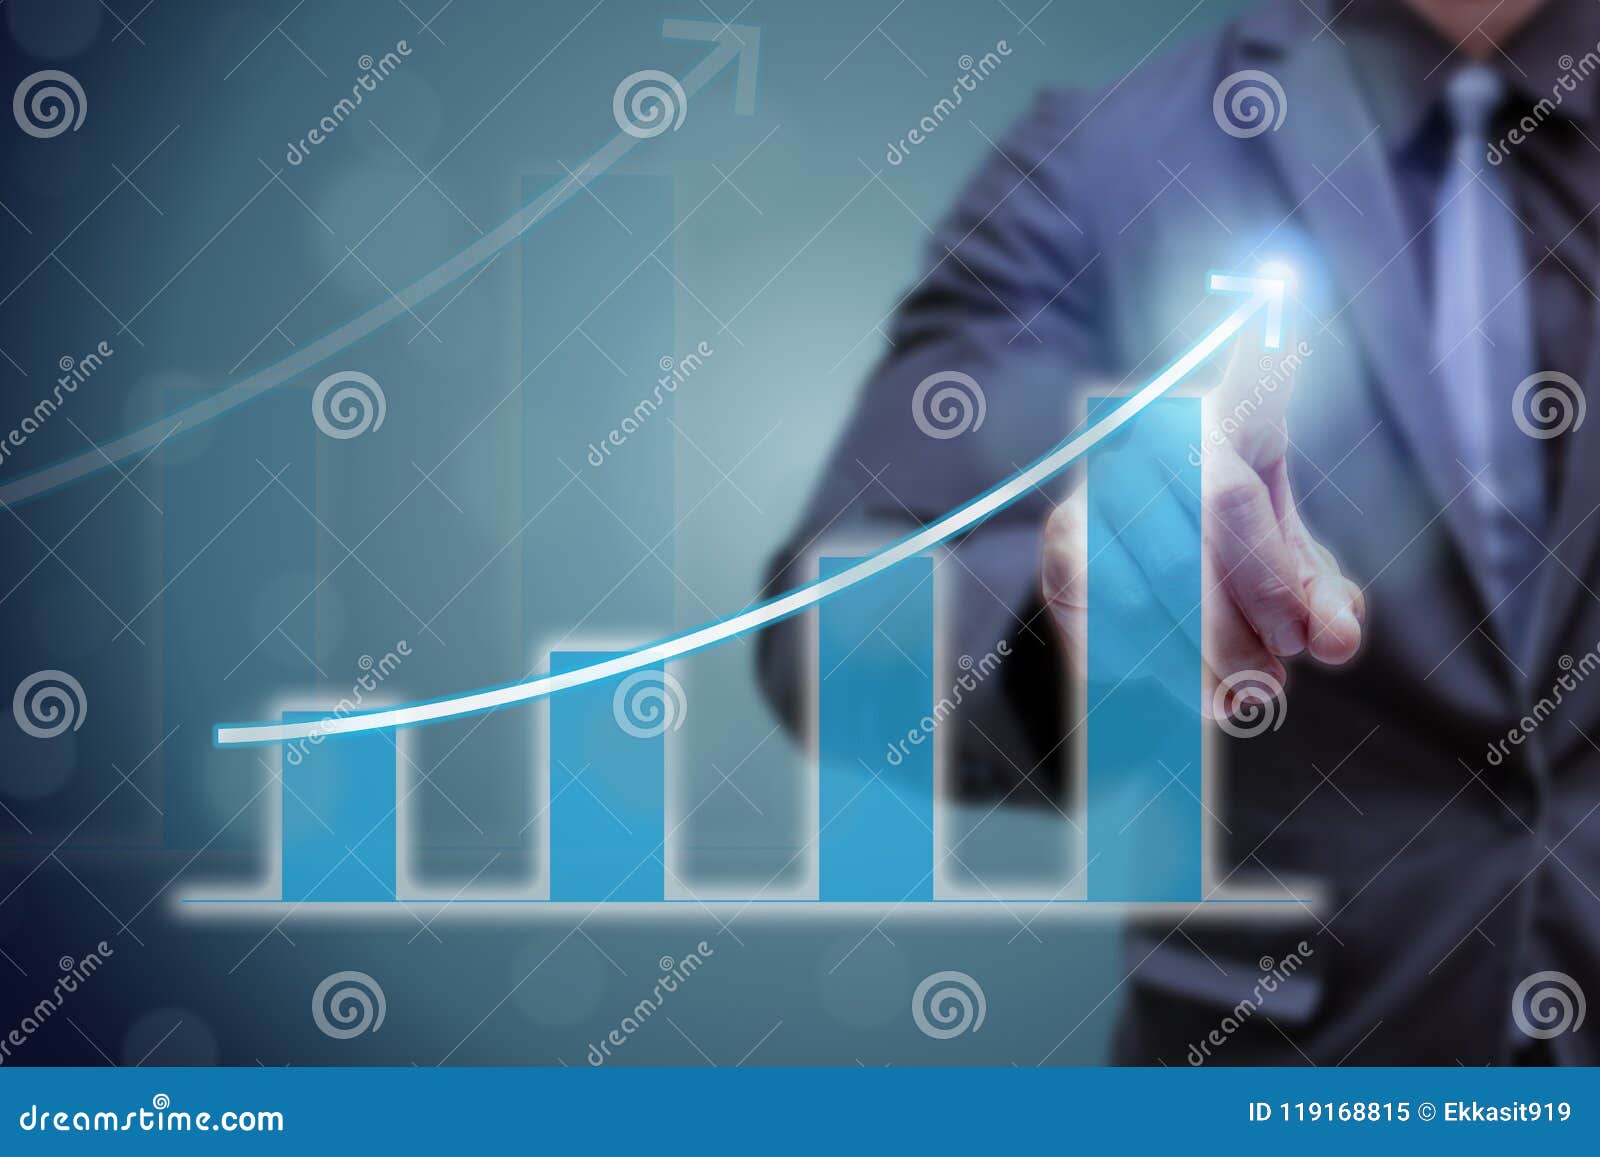 business man point hand on the top of arrow graph with high rate of growth. the success and growing growth graph in the company or